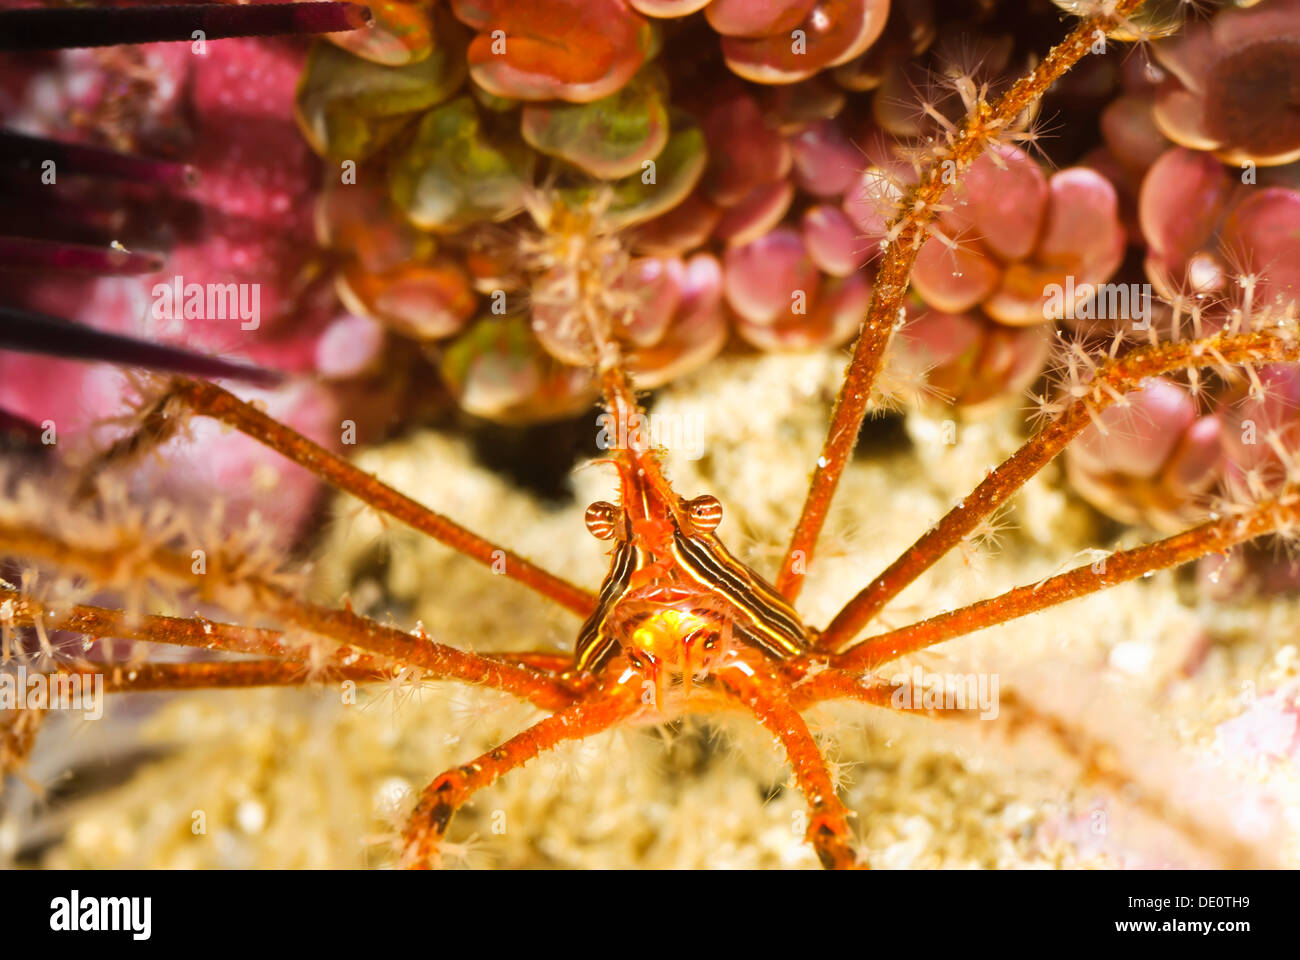 Panamic arrow crab, Stenorhynchus debilis, with hydroids covering its legs, Sea of Cortez, Mexico, Pacific Stock Photo